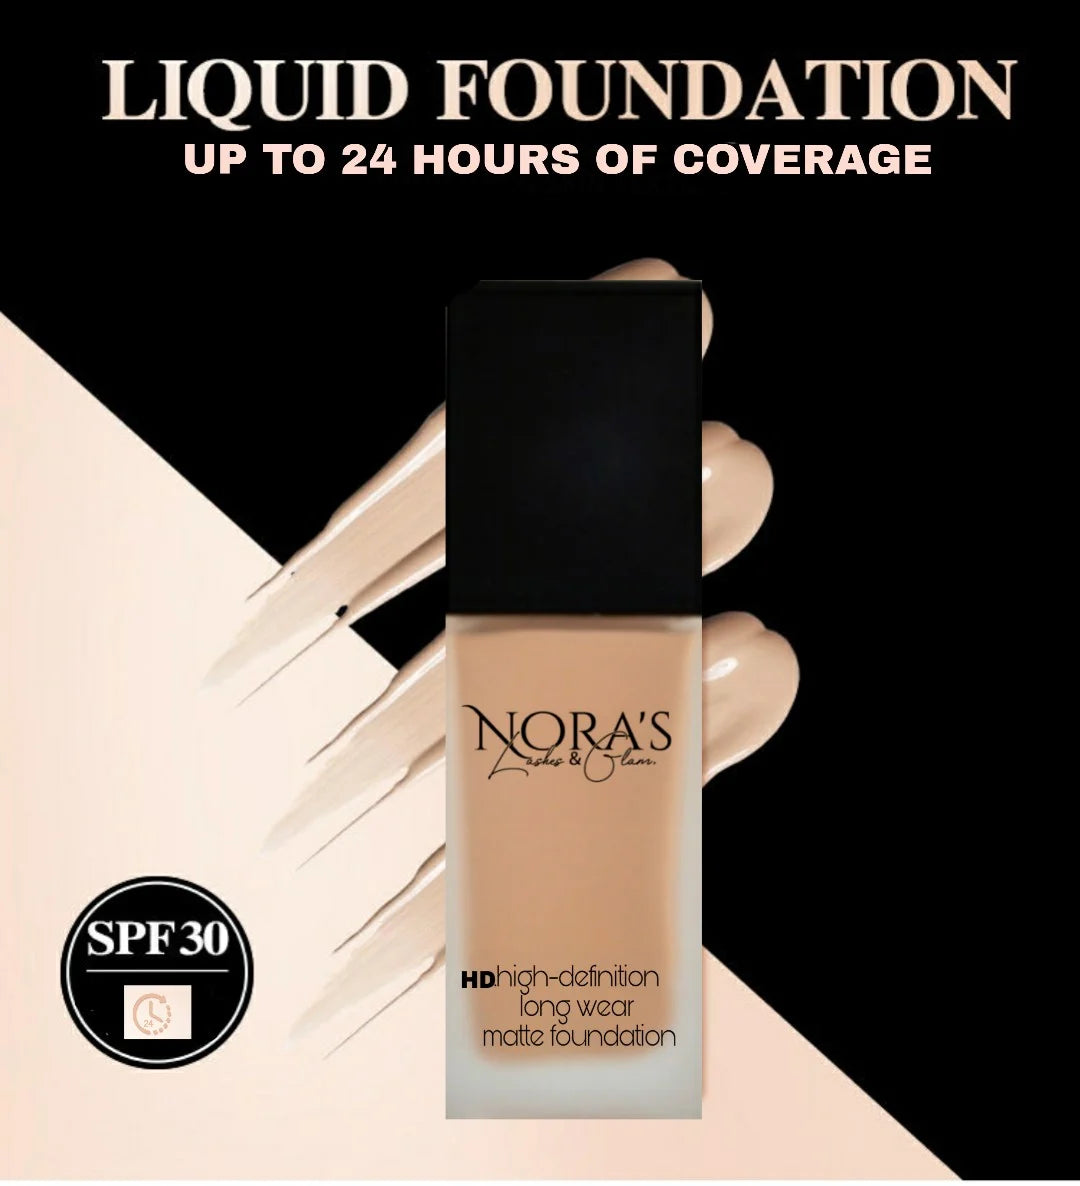 LIQUID FOUNDATION UP TO 24 HOURS OF COVERAGE